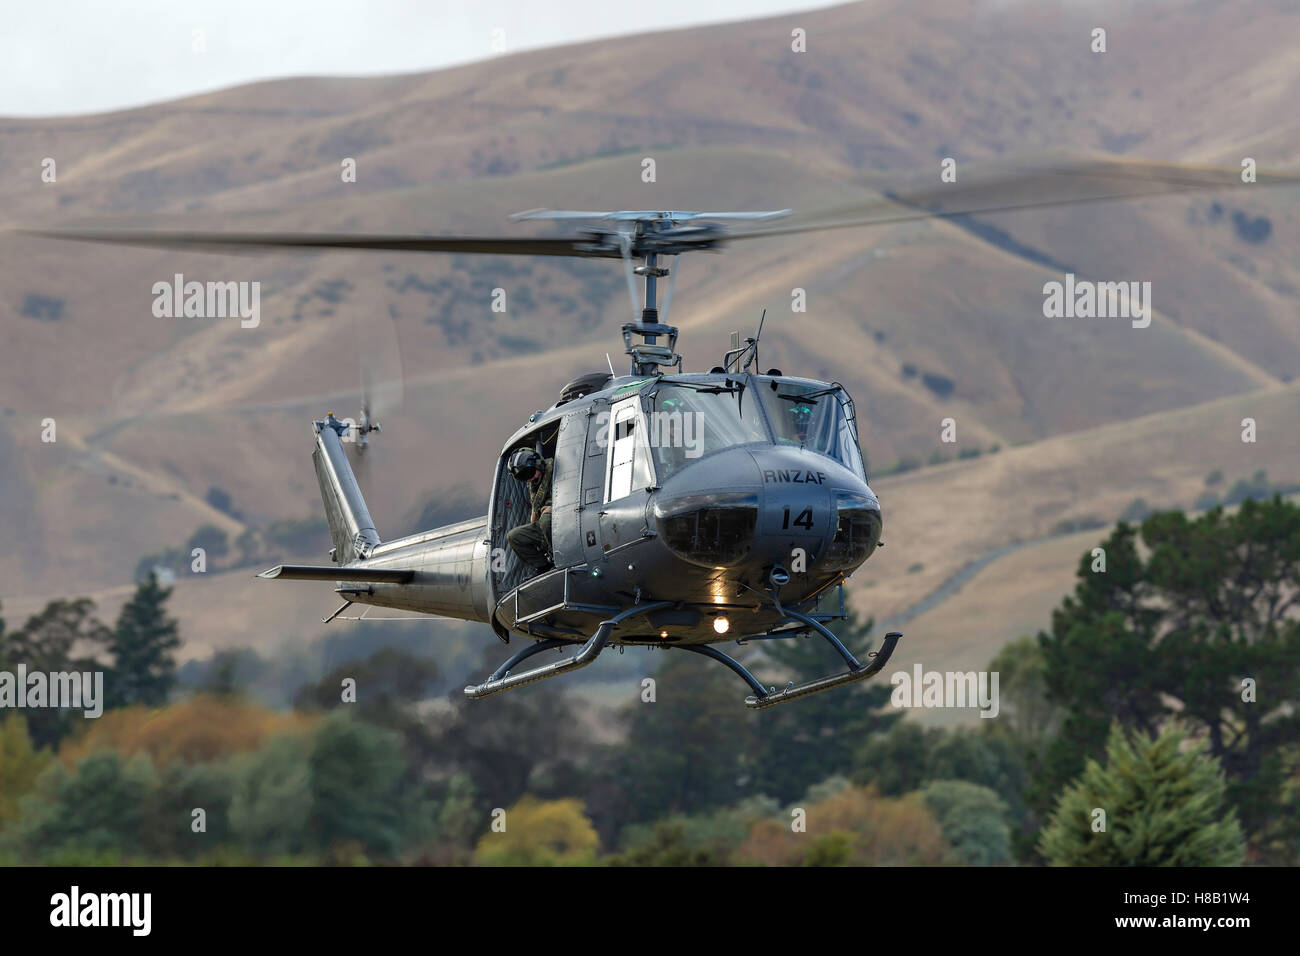 Royal New Zealand Air Force (RNZAF) Bell UH-1H Iroquois helicopter Stock Photo